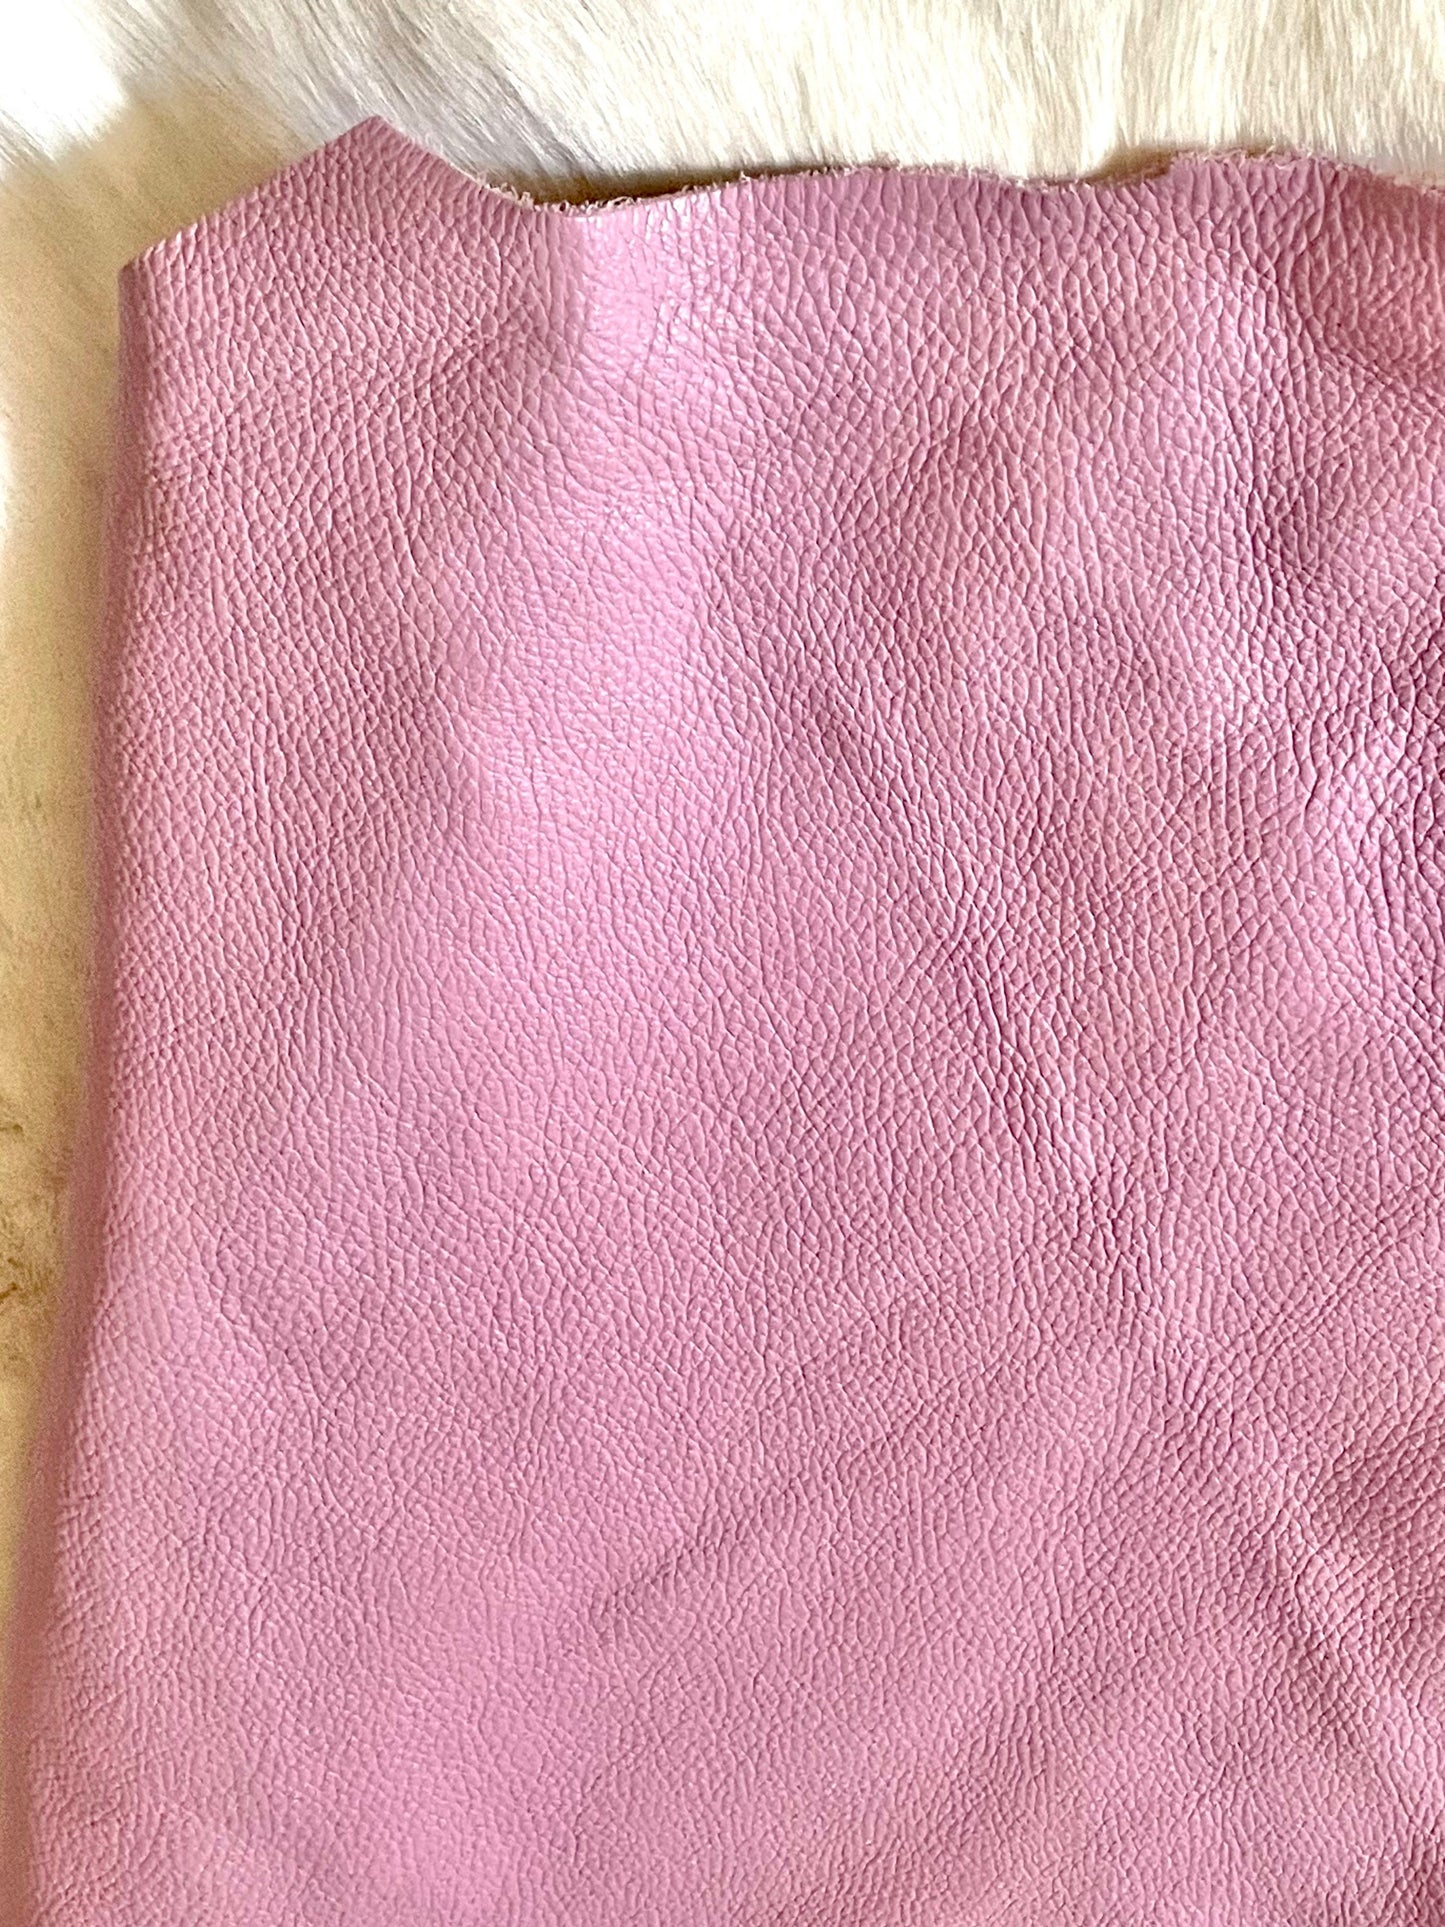 Pink Pebbled Chrome tanned Designer leather - Raw Leather - Wholesale Leather 2-4oz